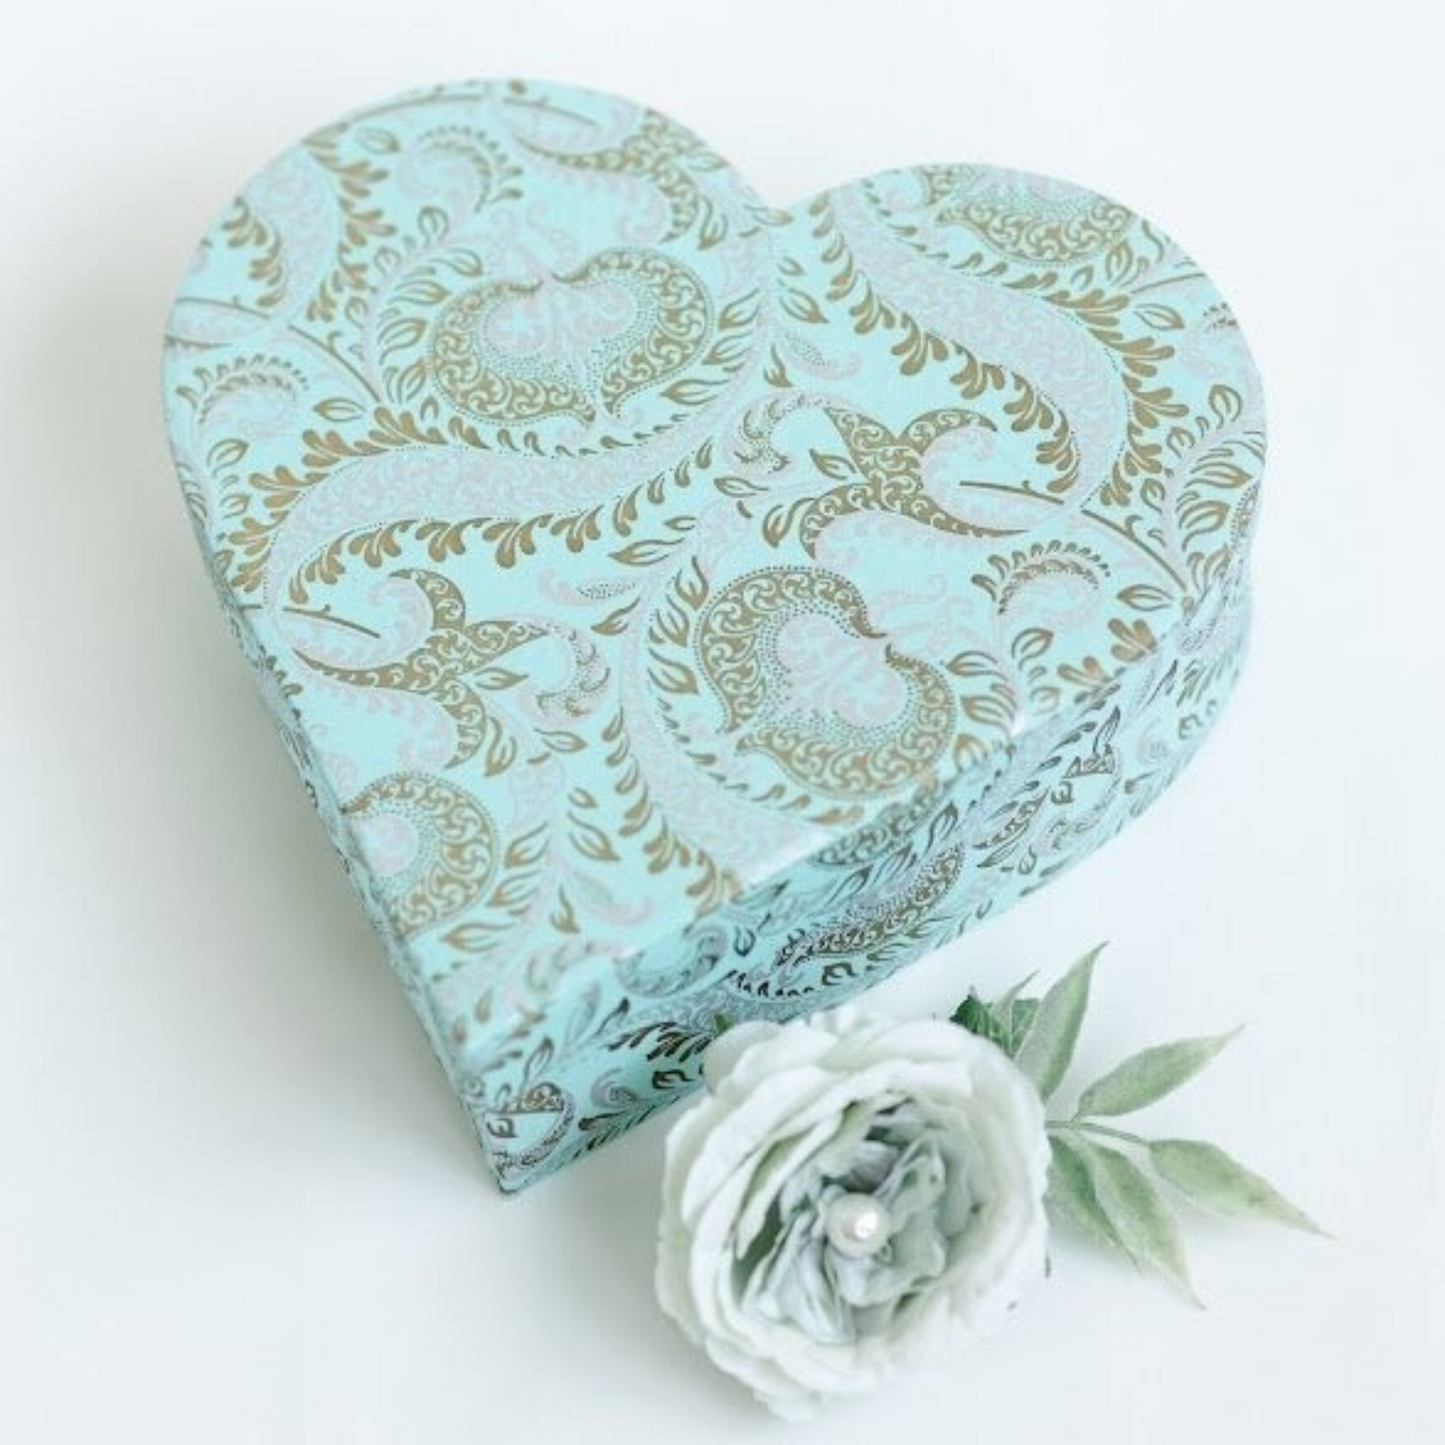 kurmai gift packaging uk teal and gold colour